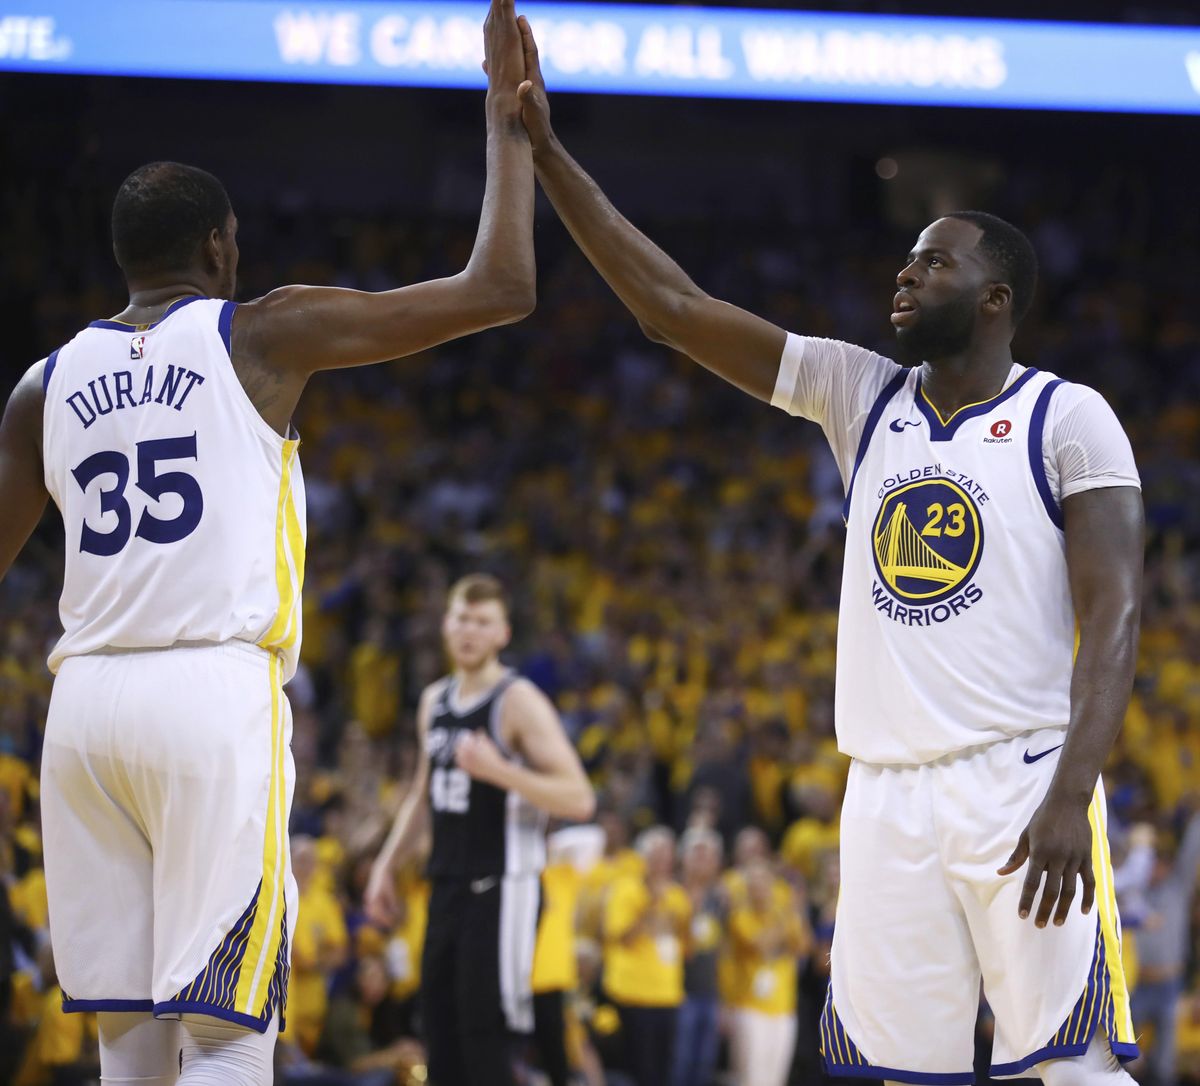 Golden State Warriors’ Kevin Durant (35) and Draymond Green celebrate in the final seconds of Game 5 of the team’s first-round NBA basketball playoff series against the San Antonio Spurs on Tuesday, April 24, 2018, in Oakland, Calif. The Warriors won 99-91, eliminating the Spurs from the playoffs. (Ben Margot / Associated Press)